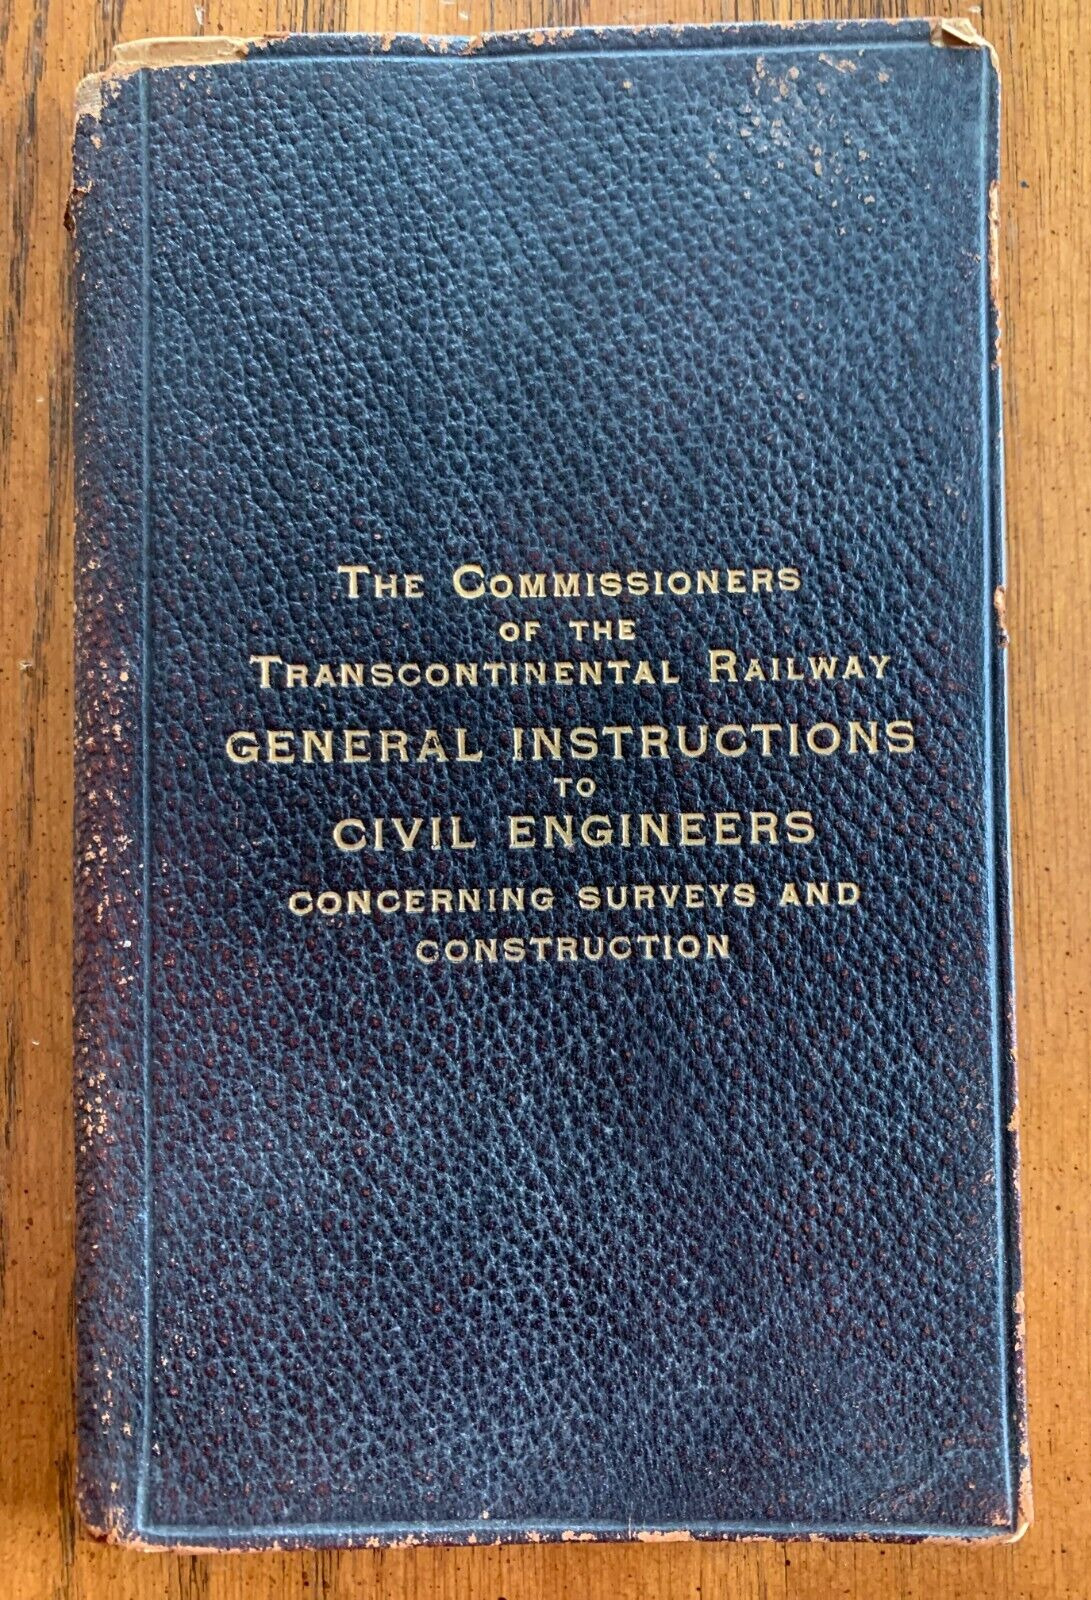 The Commissioners Of The Transcontinental Railway General Instructions PB1907